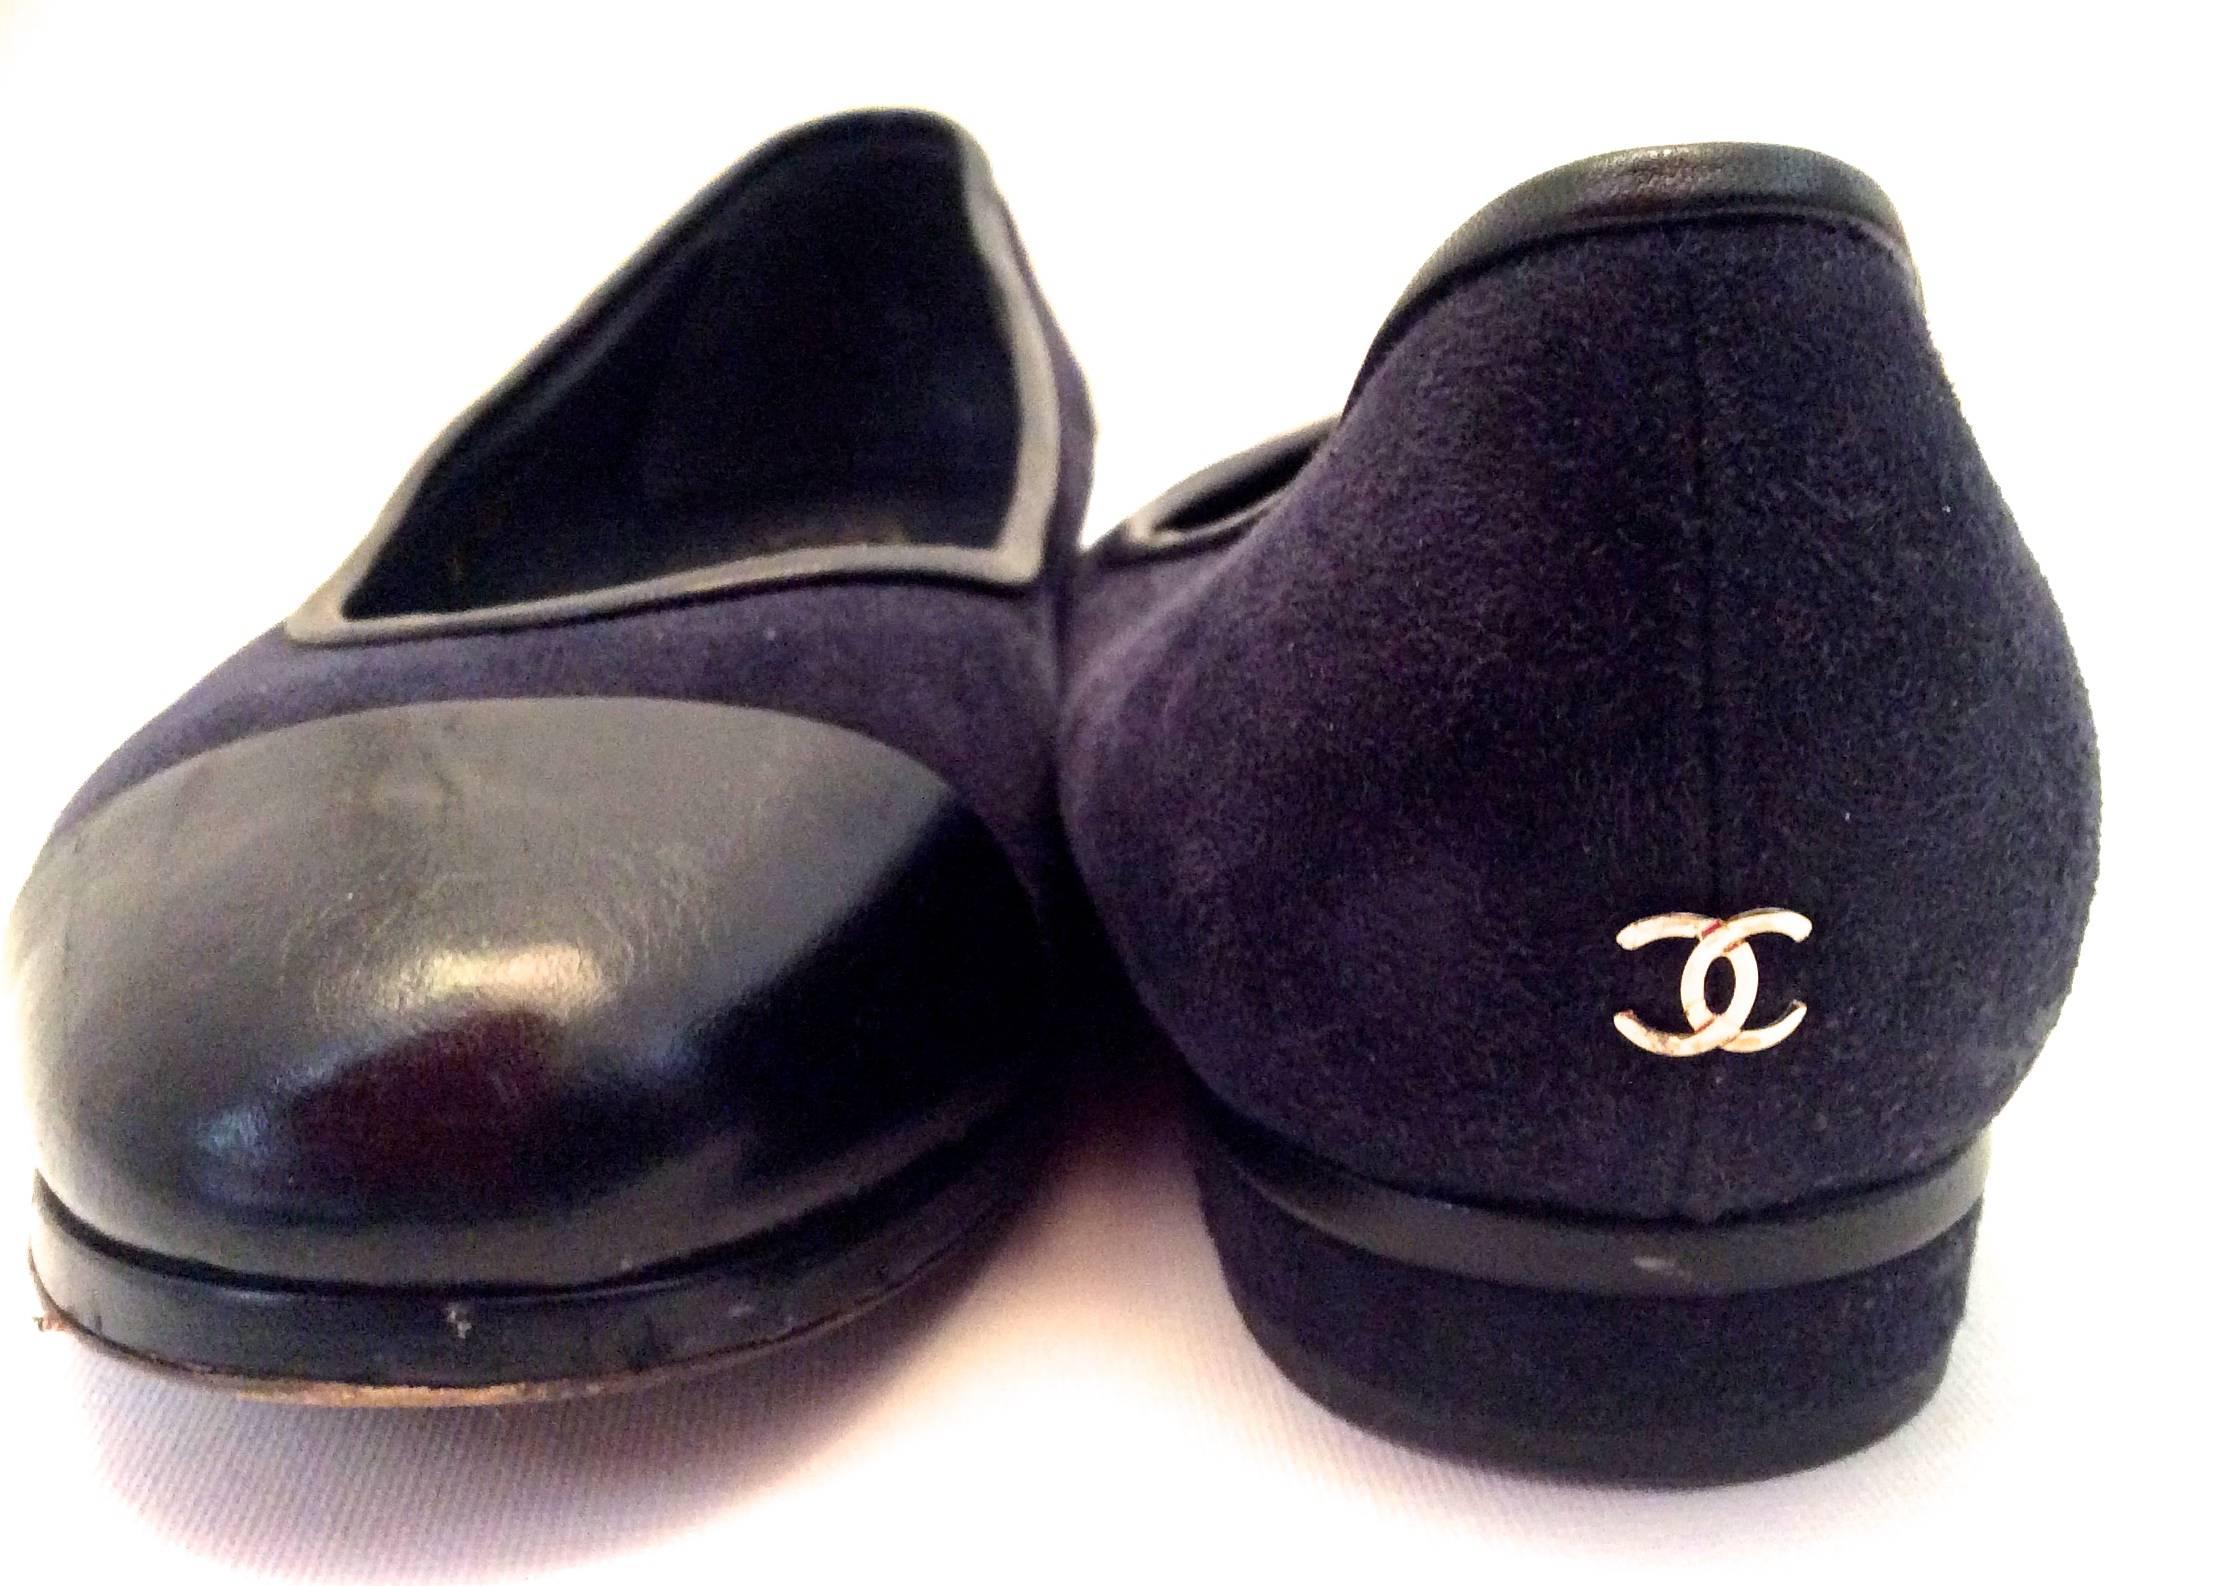 Chanel Ballerina Flats - Blue - Size 38 In Good Condition For Sale In Boca Raton, FL